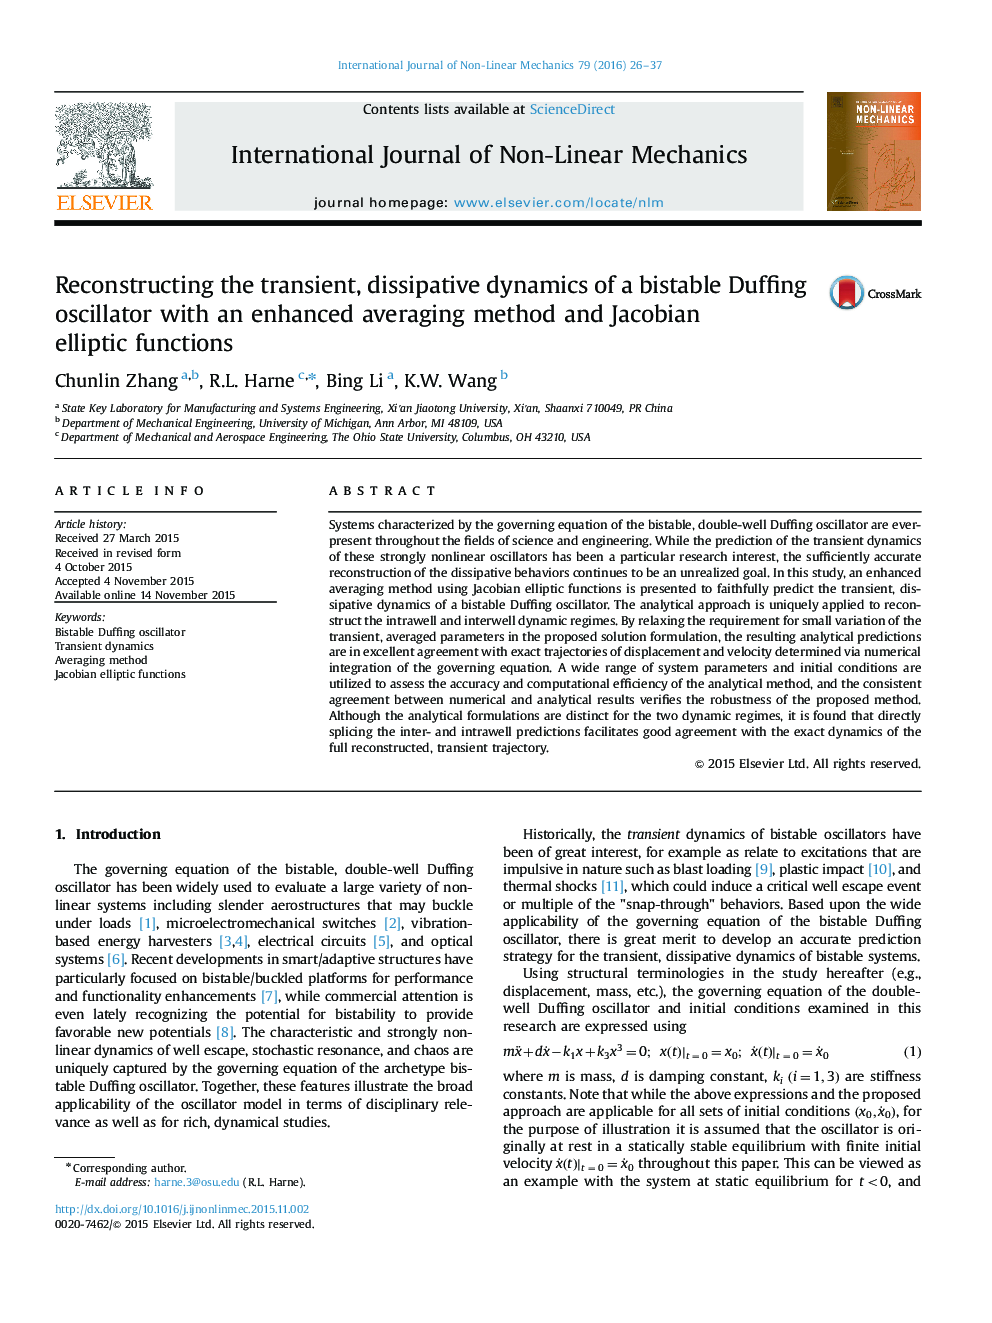 Reconstructing the transient, dissipative dynamics of a bistable Duffing oscillator with an enhanced averaging method and Jacobian elliptic functions